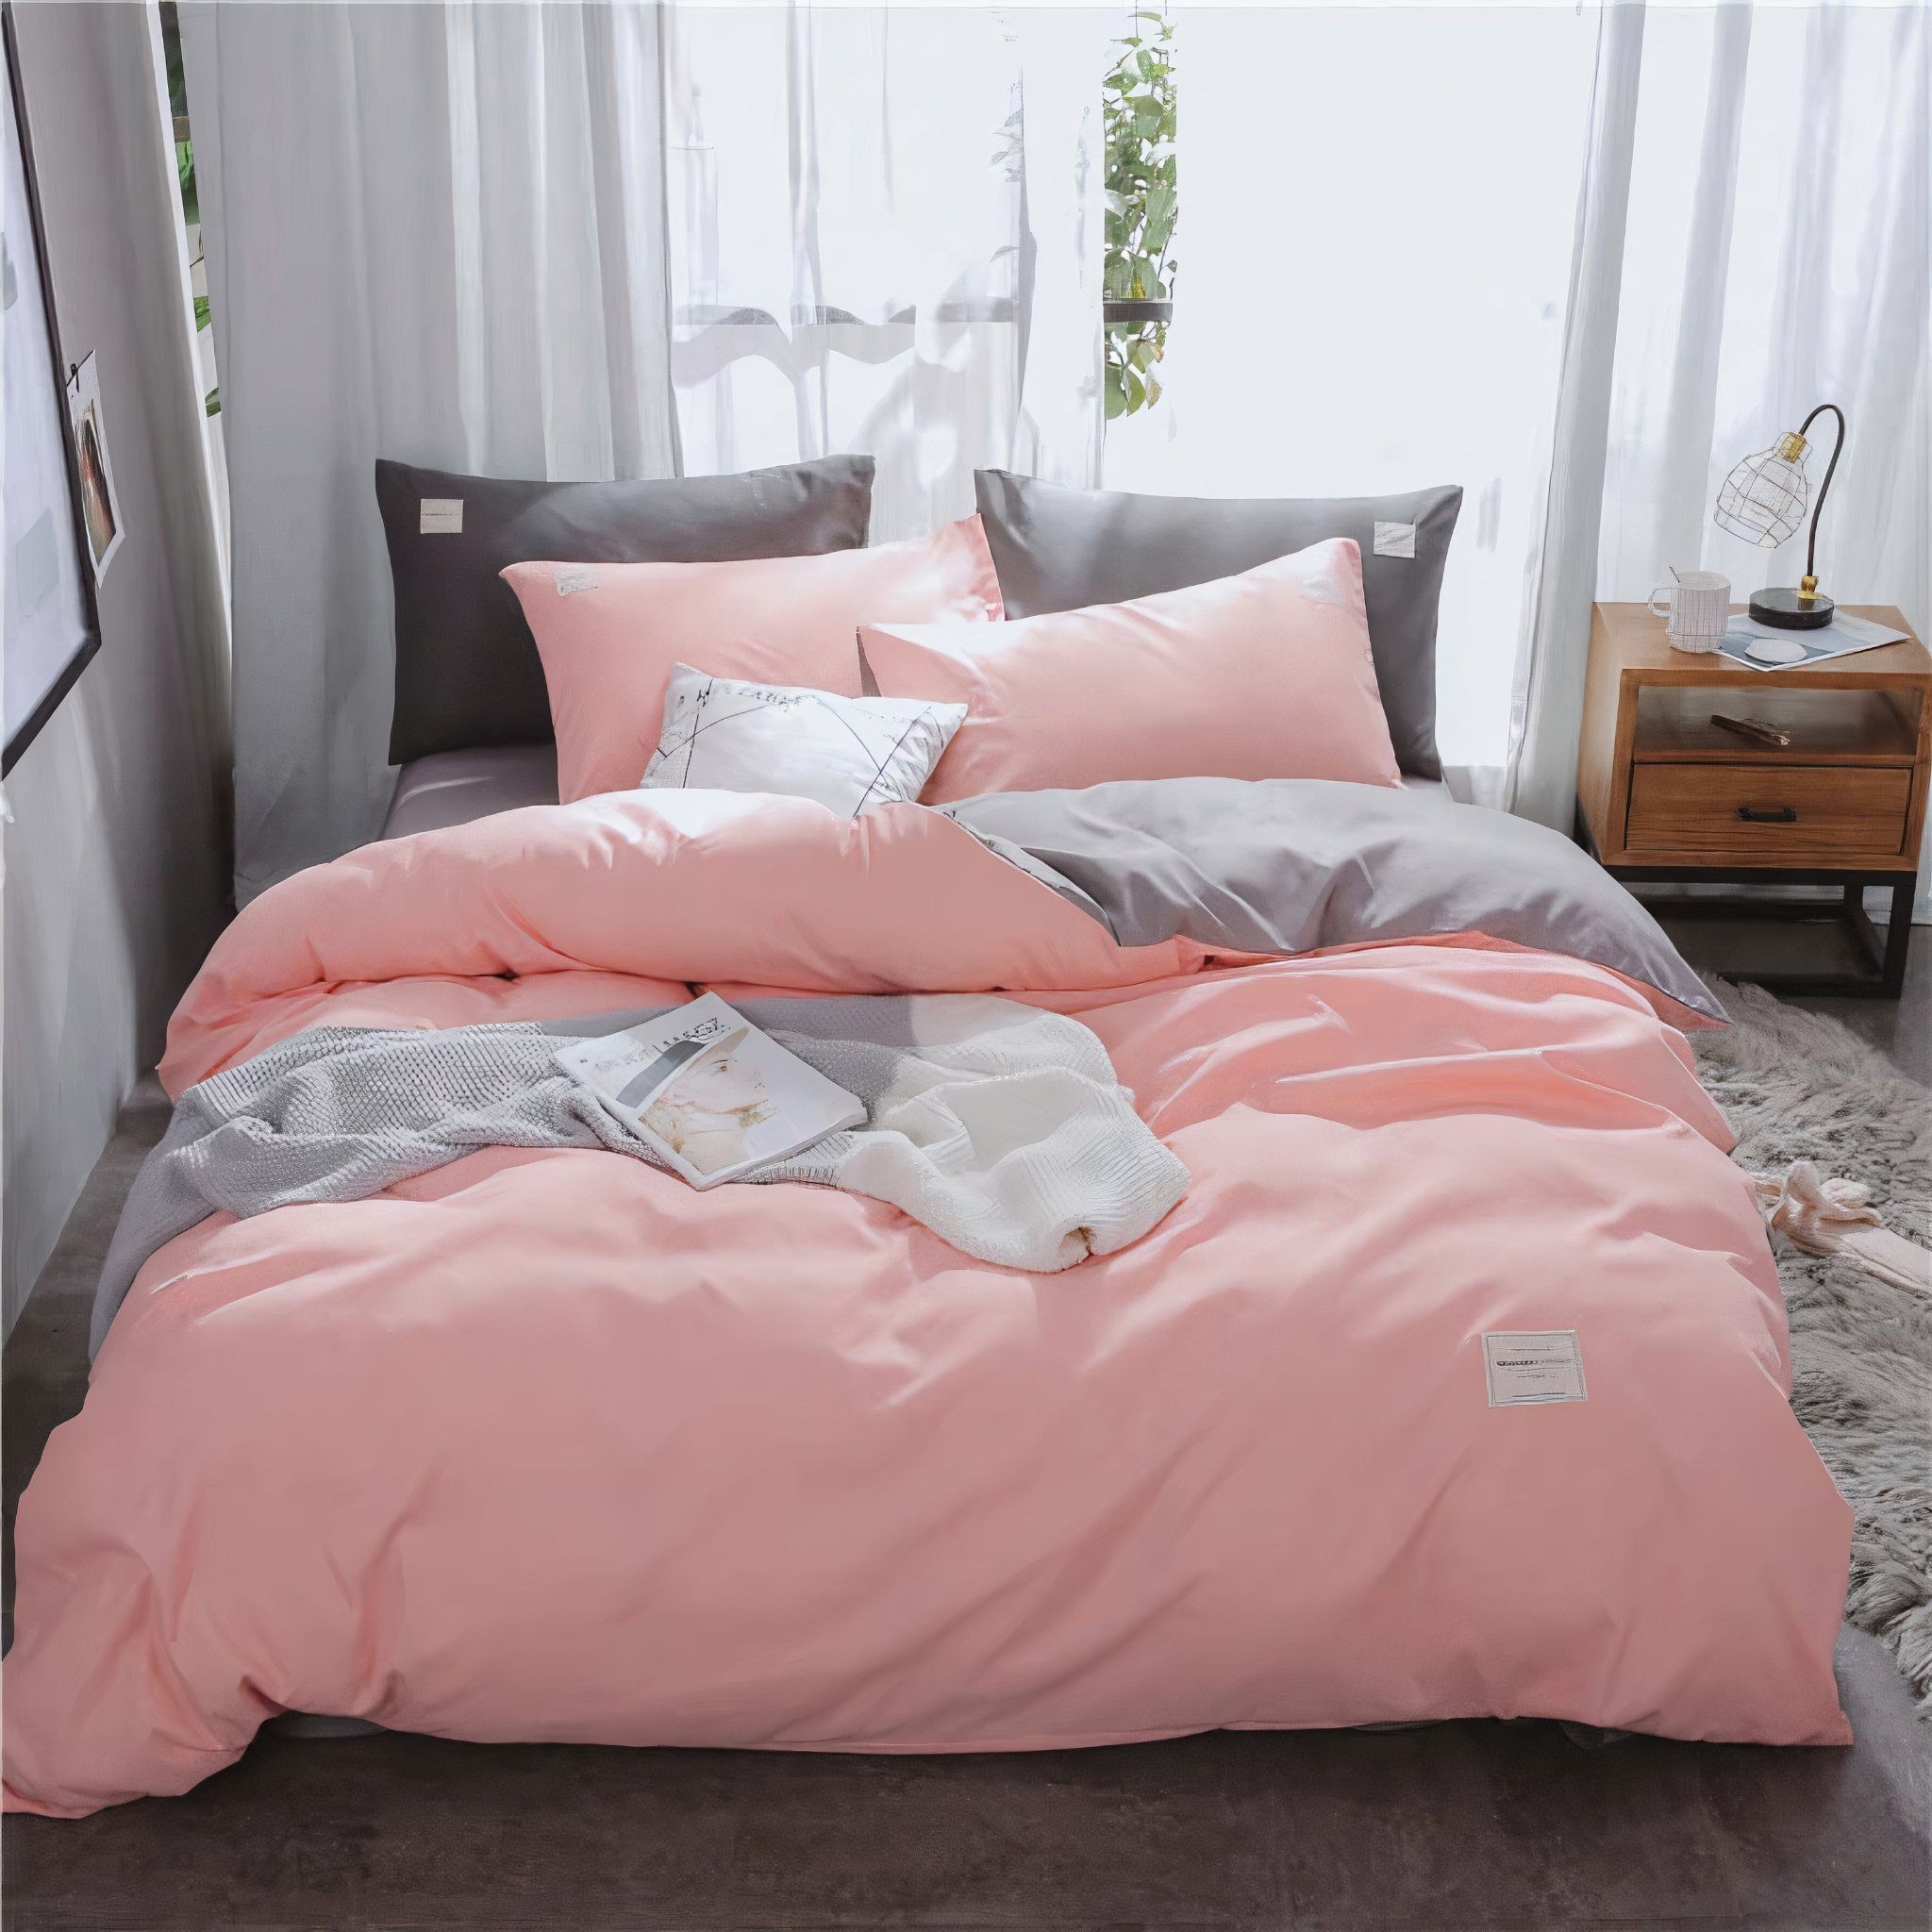 Classic Two-Tone Cotton Bed Linen – Bed Linen Set – 400-thread Count – Blush Pink / Light Grey – Double – The Trouvailles